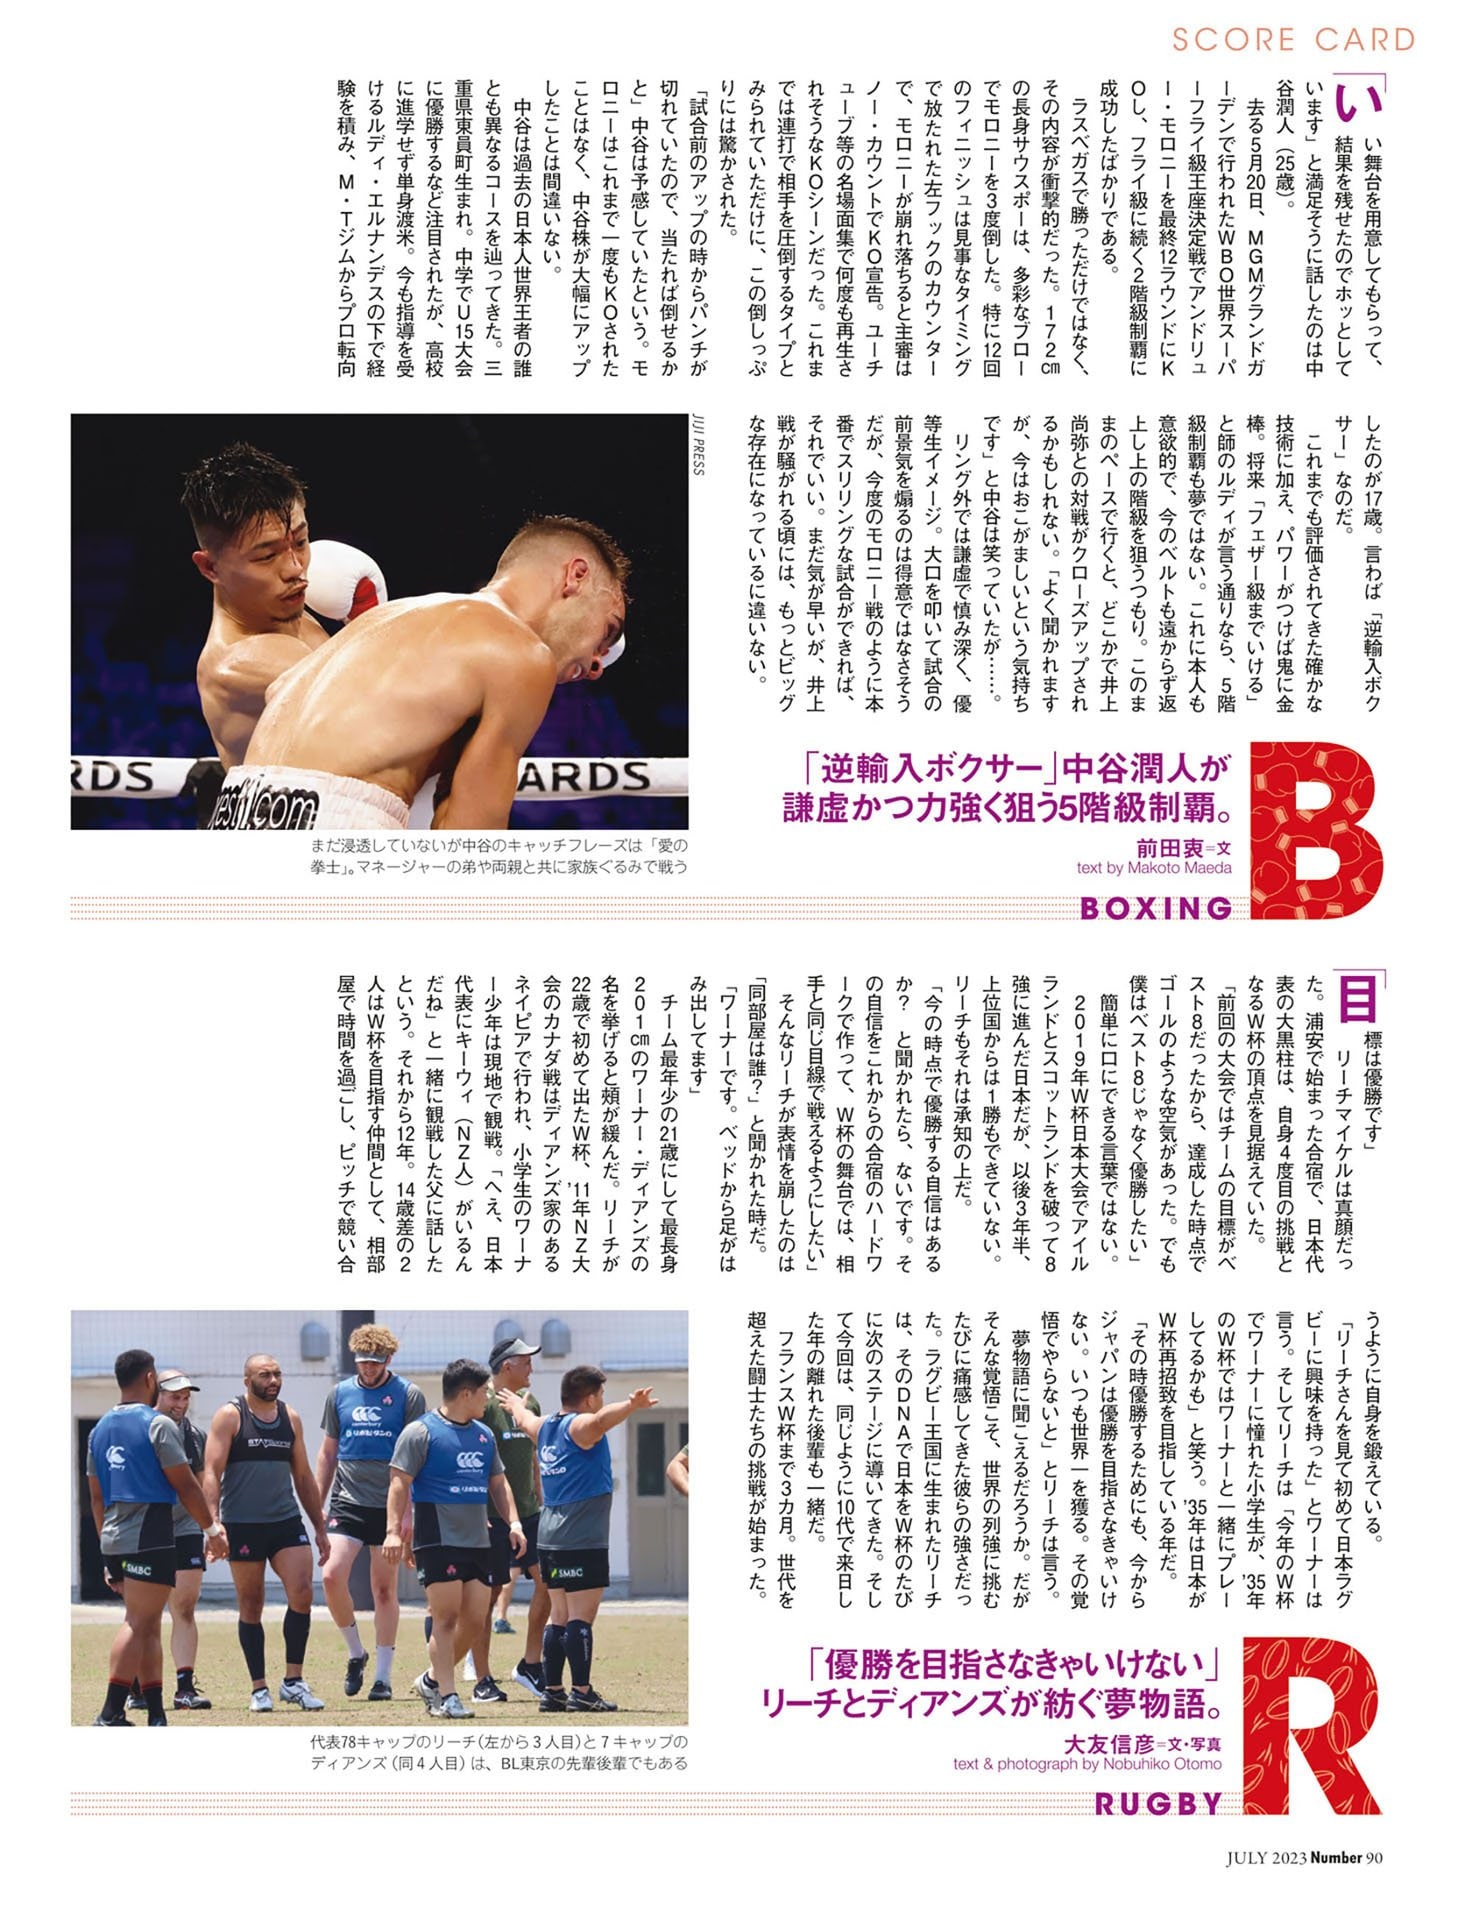 【SCORE CARD】BOXING／RUGBY